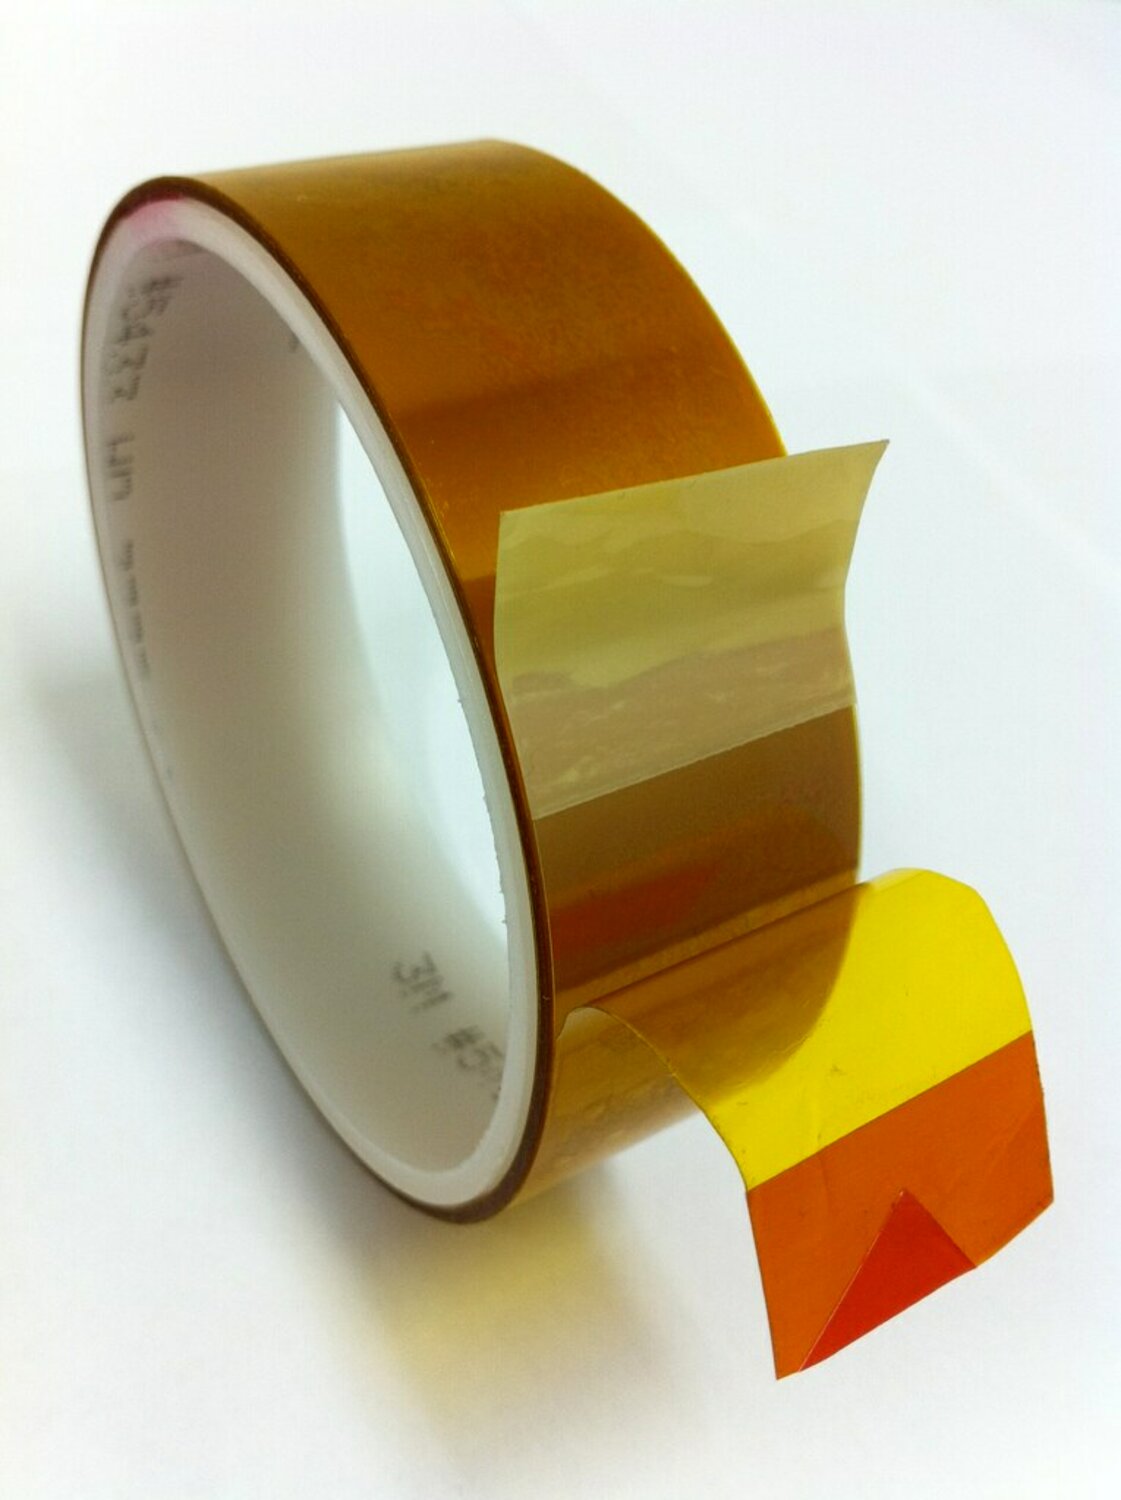 7010373485 - 3M Linered Low-Static Polyimide Film Tape 5433 Amber, 5-1/2 in x 36 yds
x 2.7 mil, 2/Case, Bulk